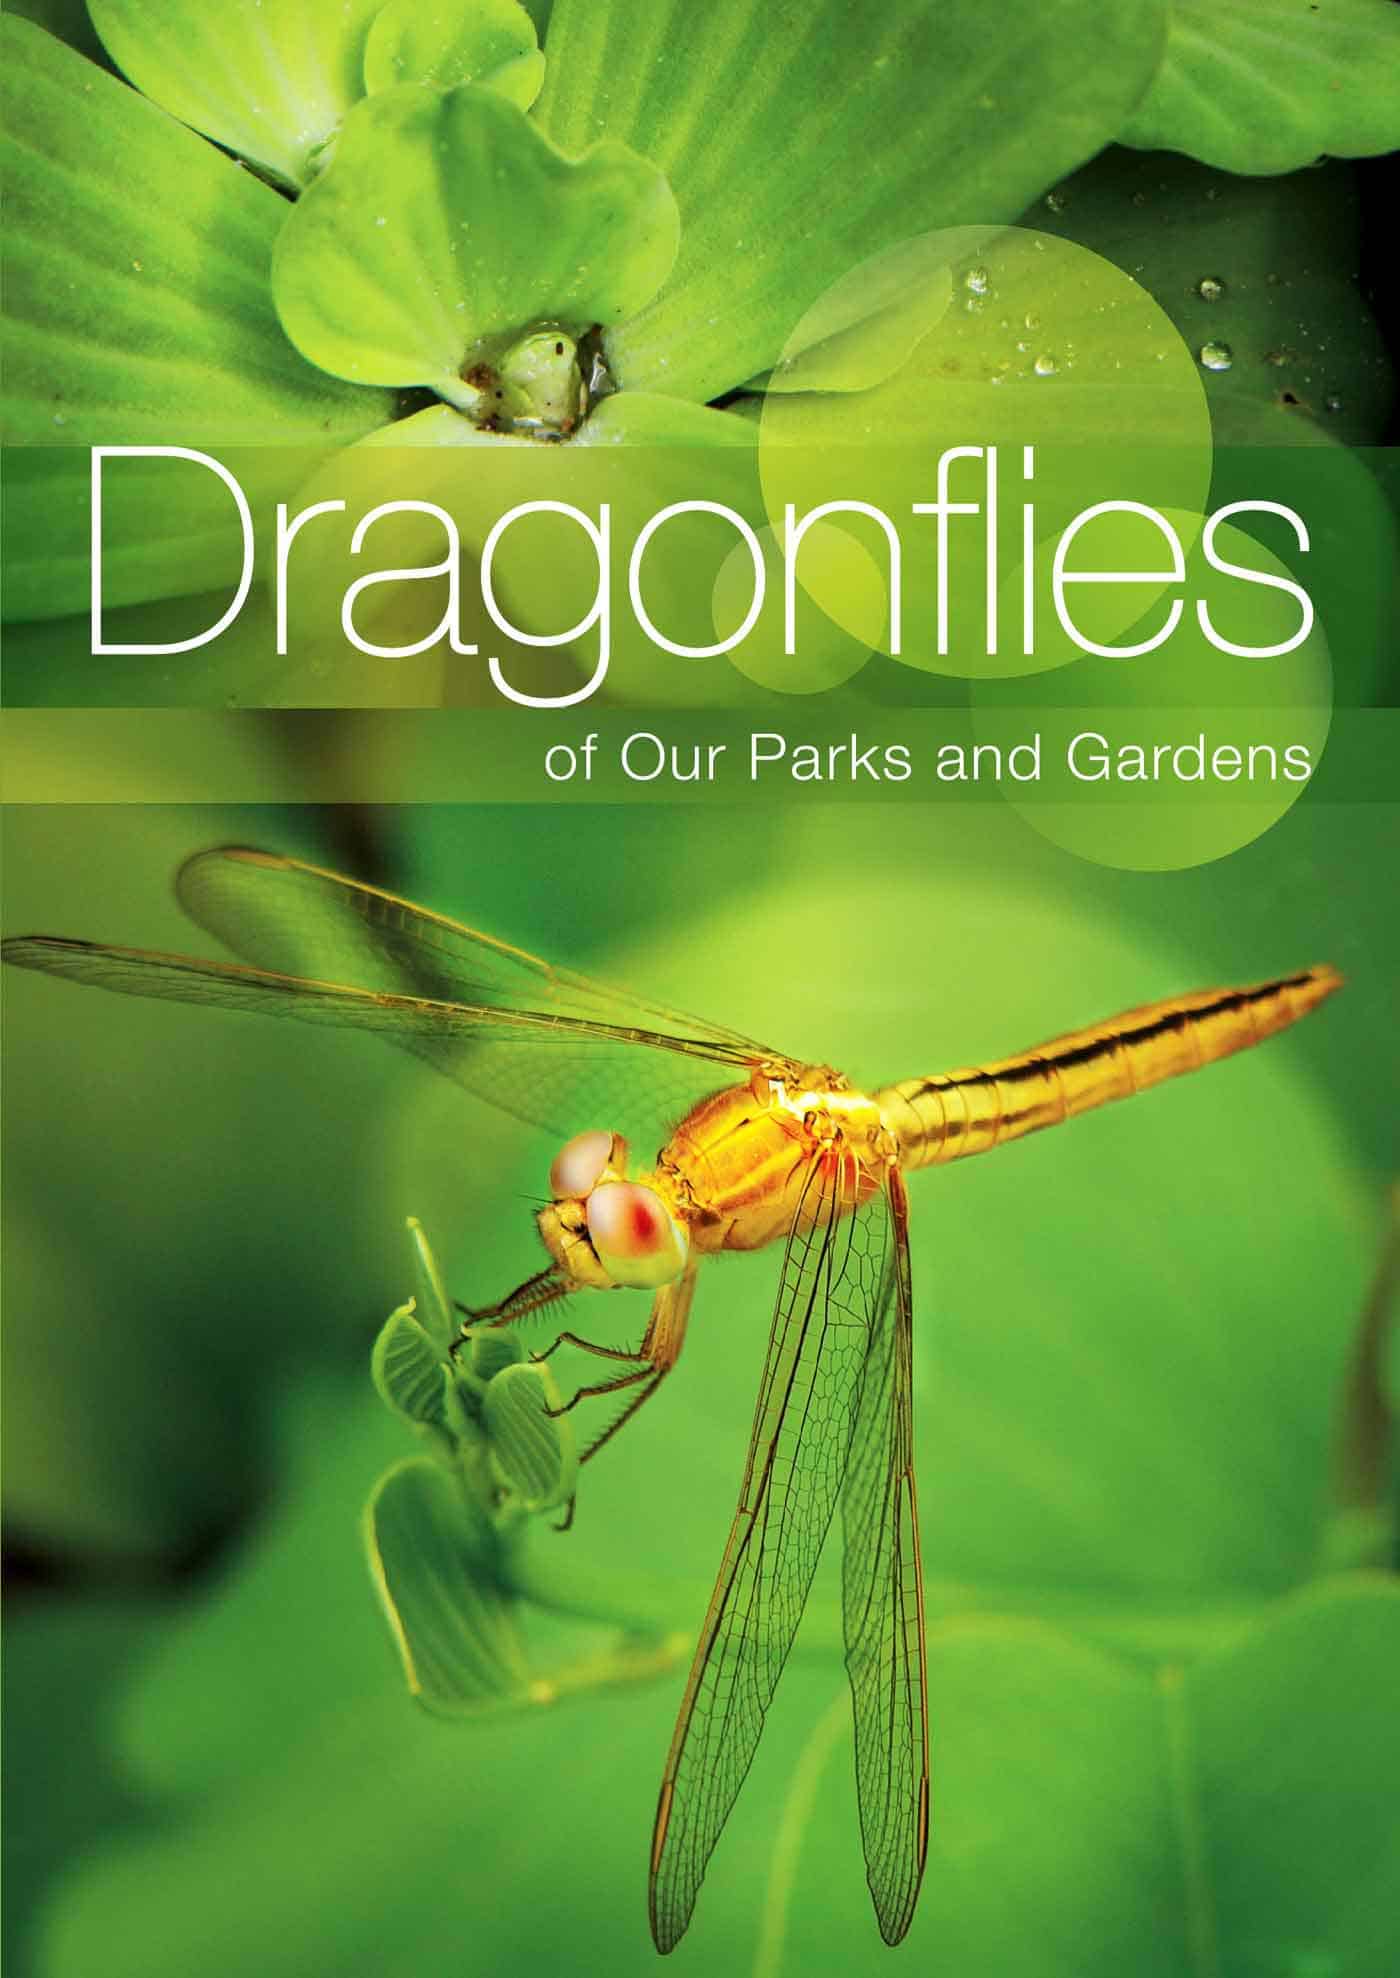 Dragonflies of Our Parks and Gardens